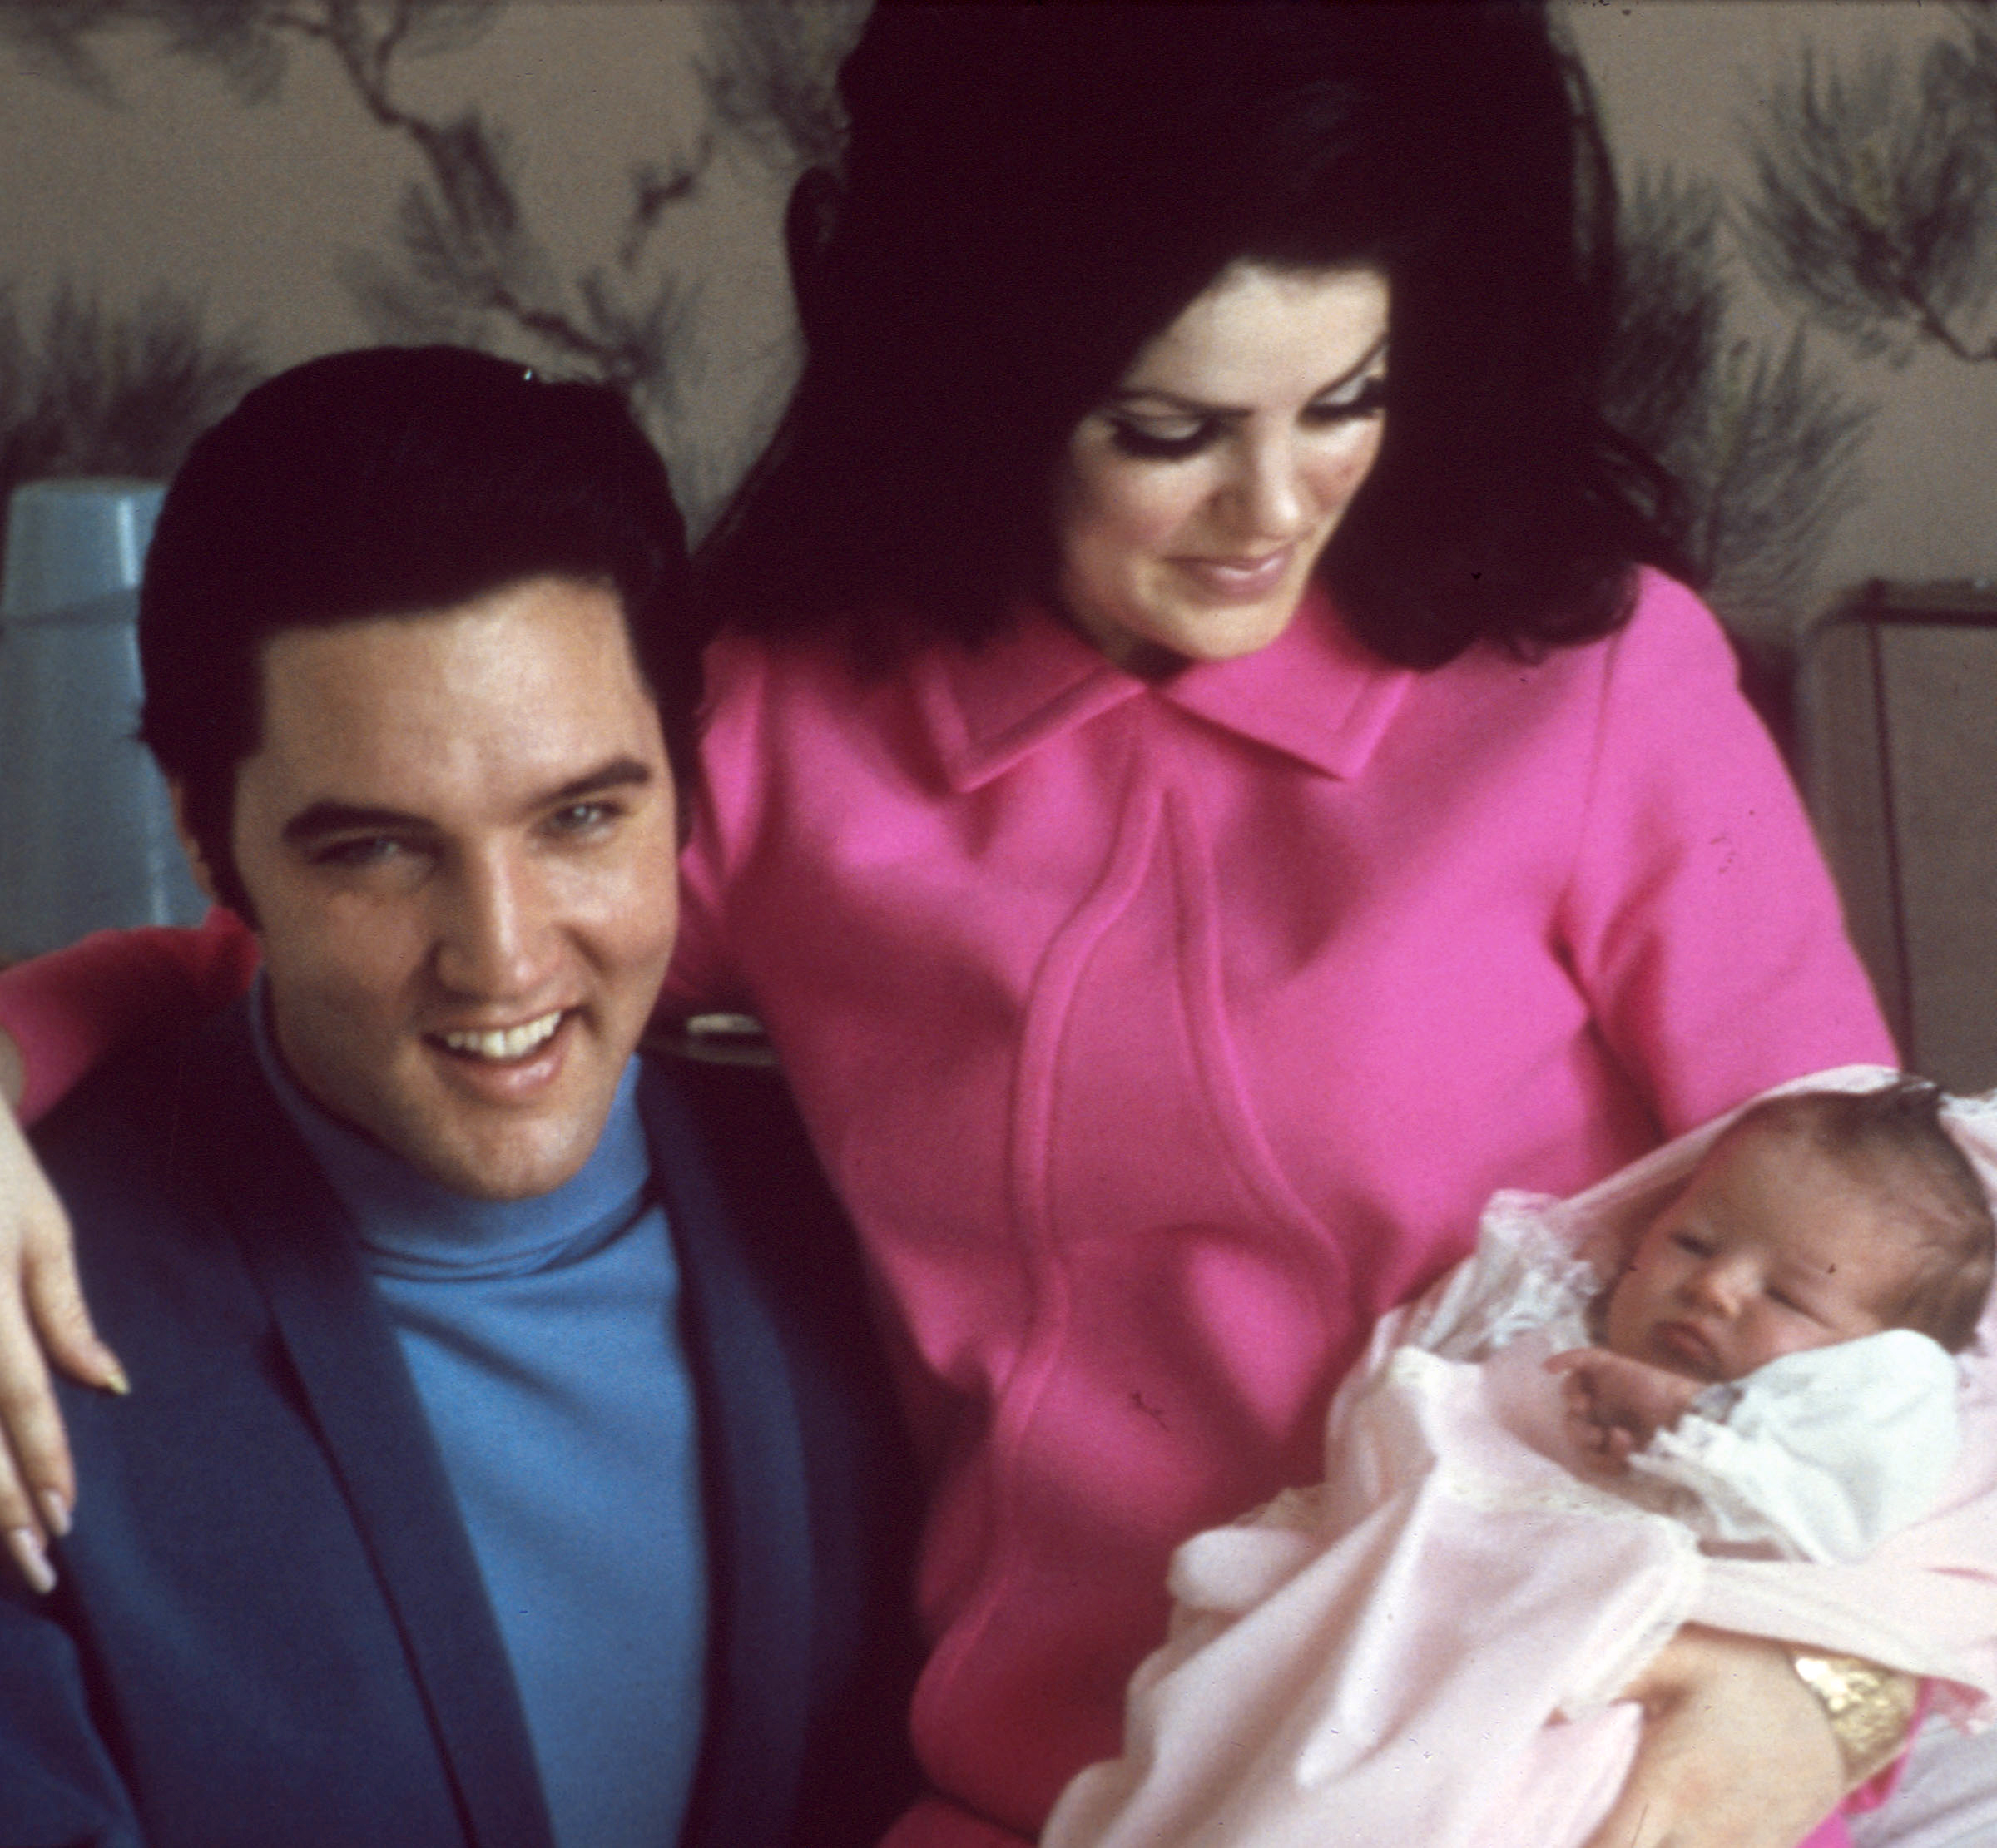 Elvis and Priscilla Presley with their daughter Lisa Marie in Memphis, Tennessee in 1968 | Source: Getty Images